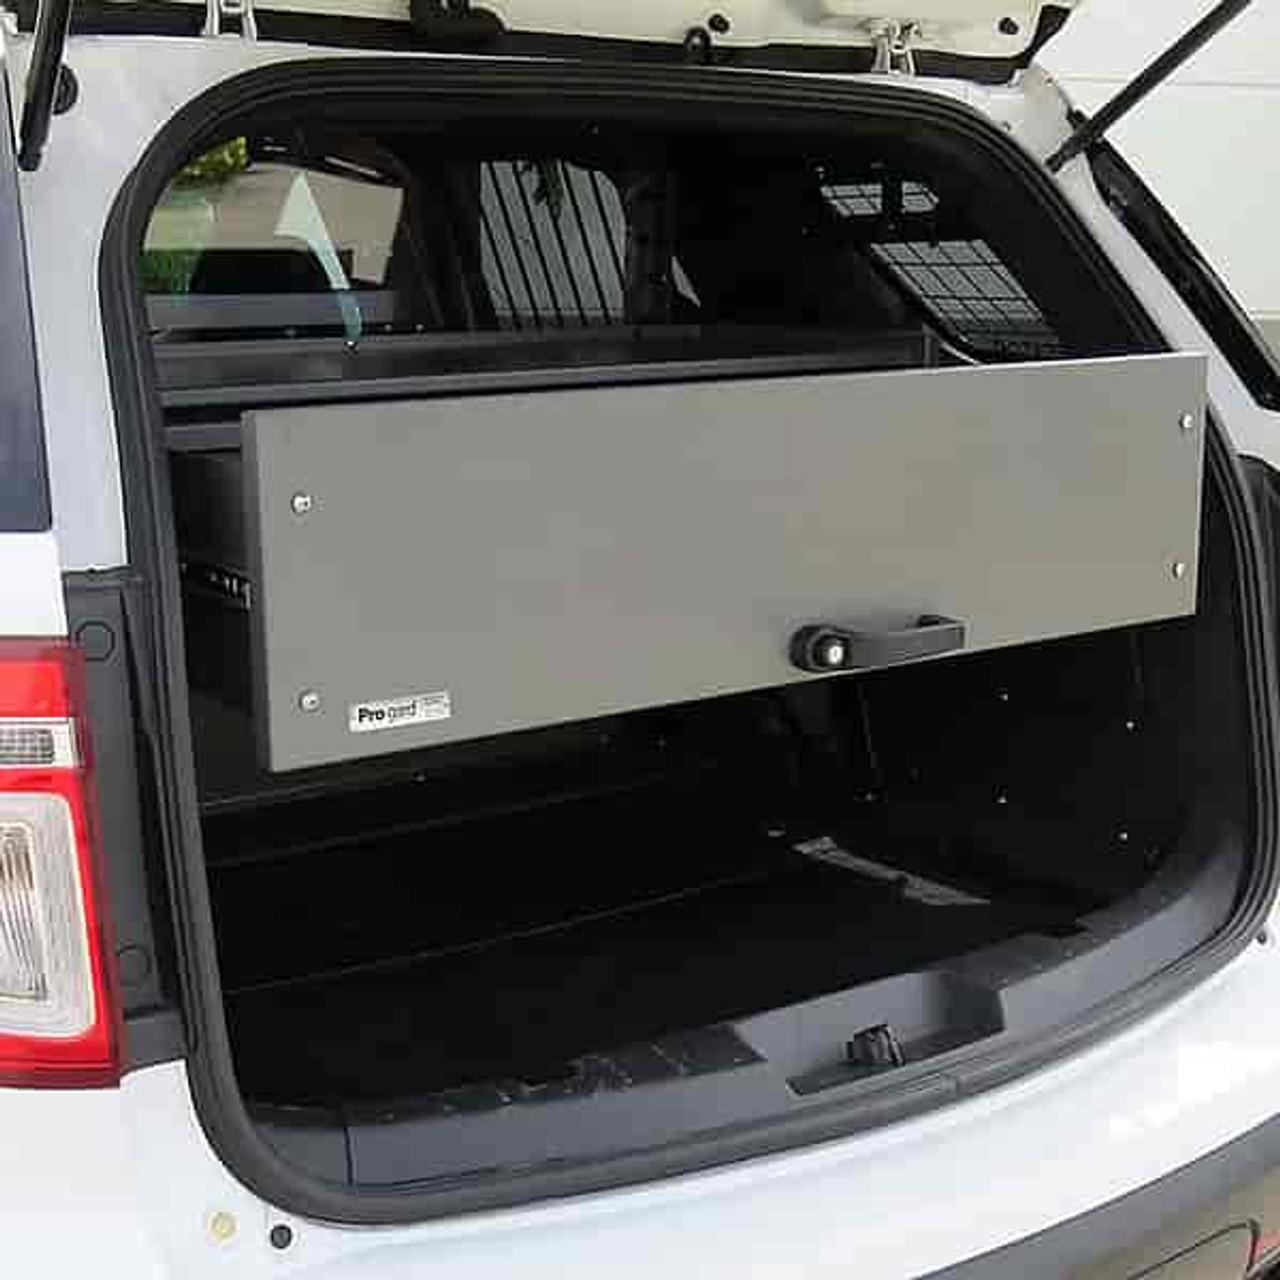 Pro-Gard Aluminum Or Wooden Weapon And Storage Drawers, Compartmentalize And Secure Cargo Area, Mounts With or Without Cargo Barrier, For 2013-2022 Ford Interceptor Utility Or 2015-2022 Chevrolet Tahoe PPV